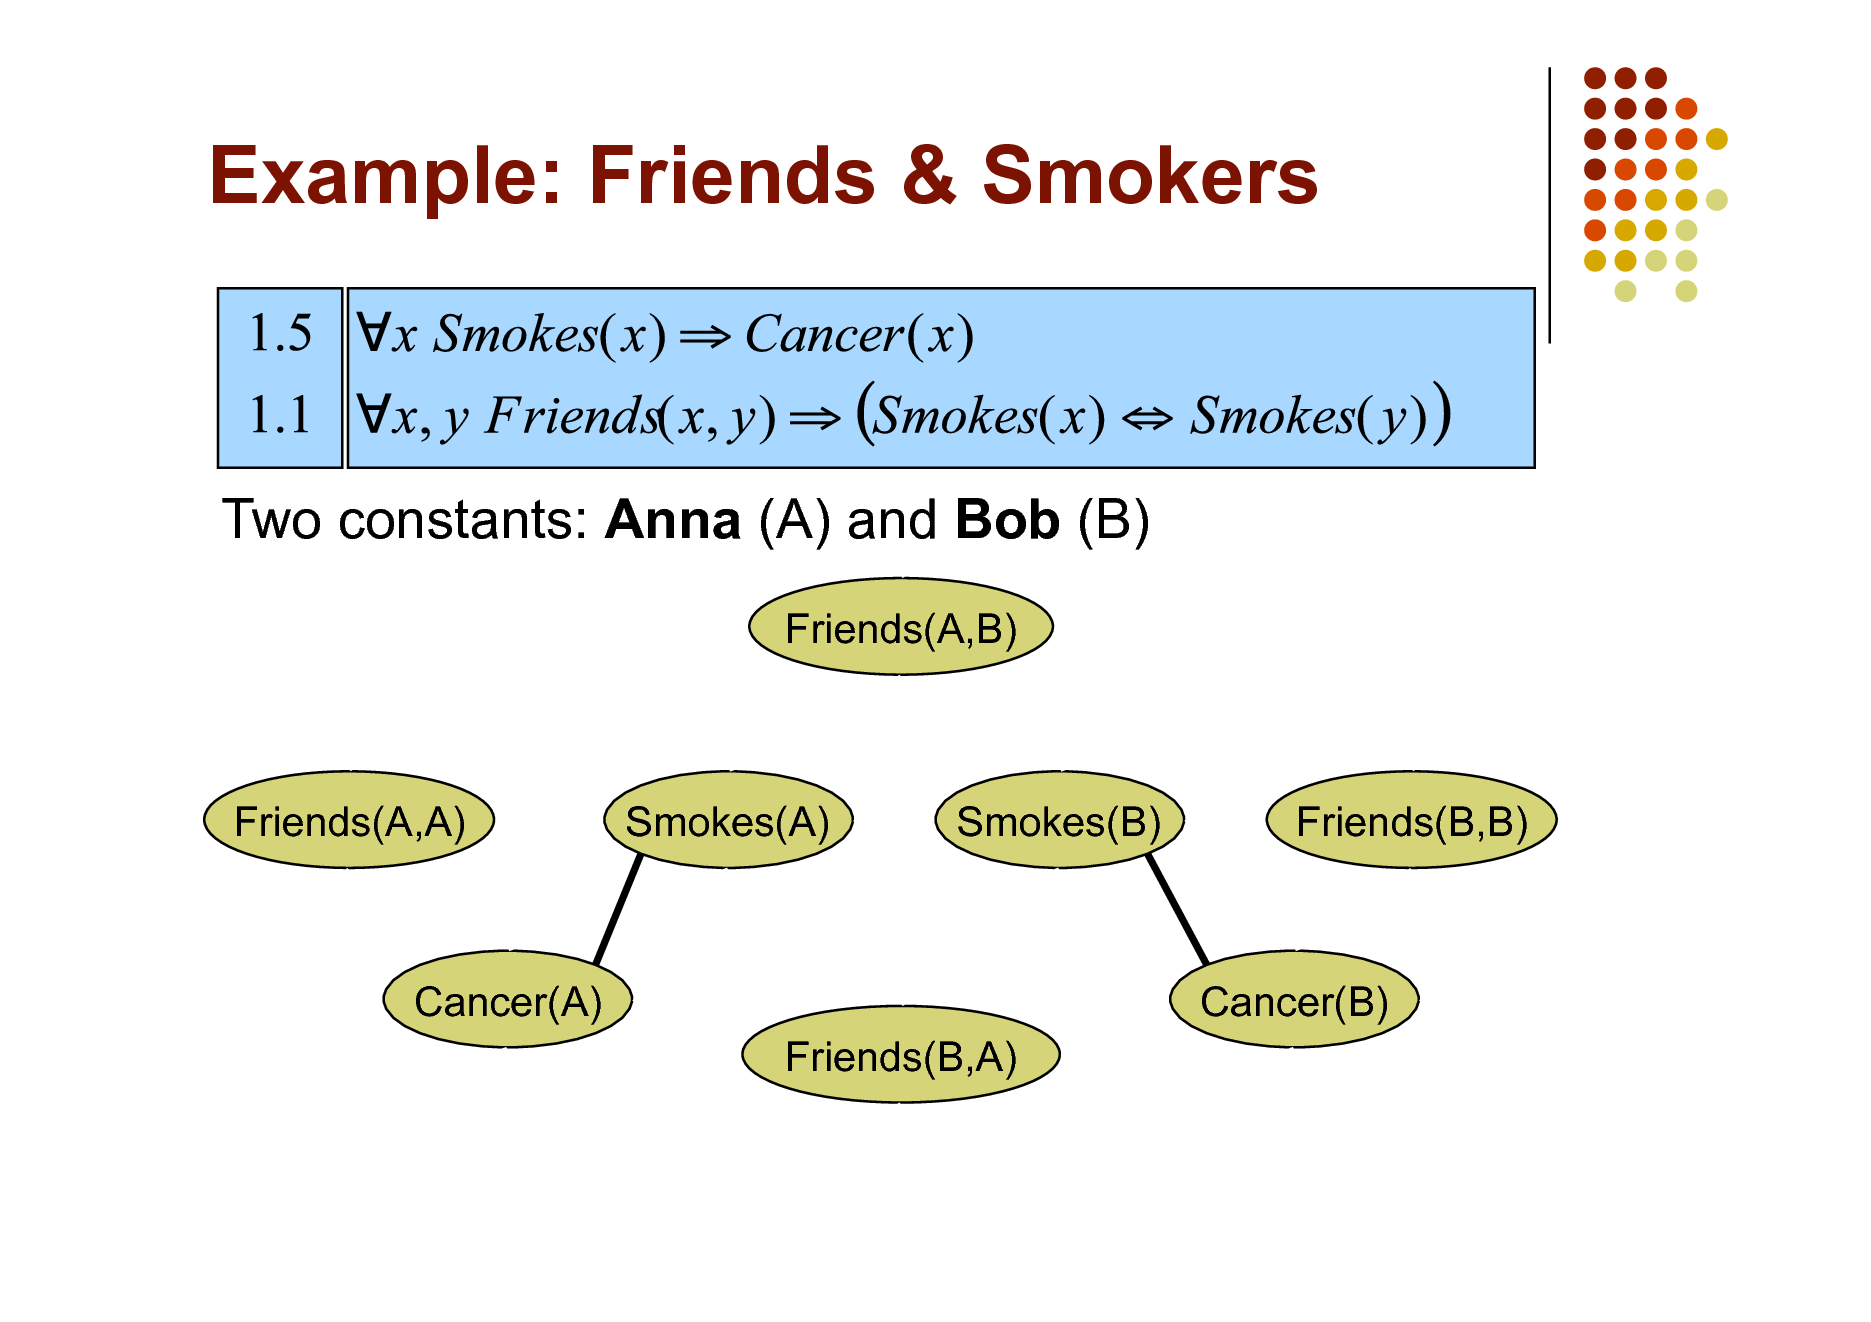 Slide: Example: Friends & Smokers

Two constants: Anna (A) and Bob (B)
Friends(A,B)

Friends(A,A)

Smokes(A)

Smokes(B)

Friends(B,B)

Cancer(A) Friends(B,A)

Cancer(B)

